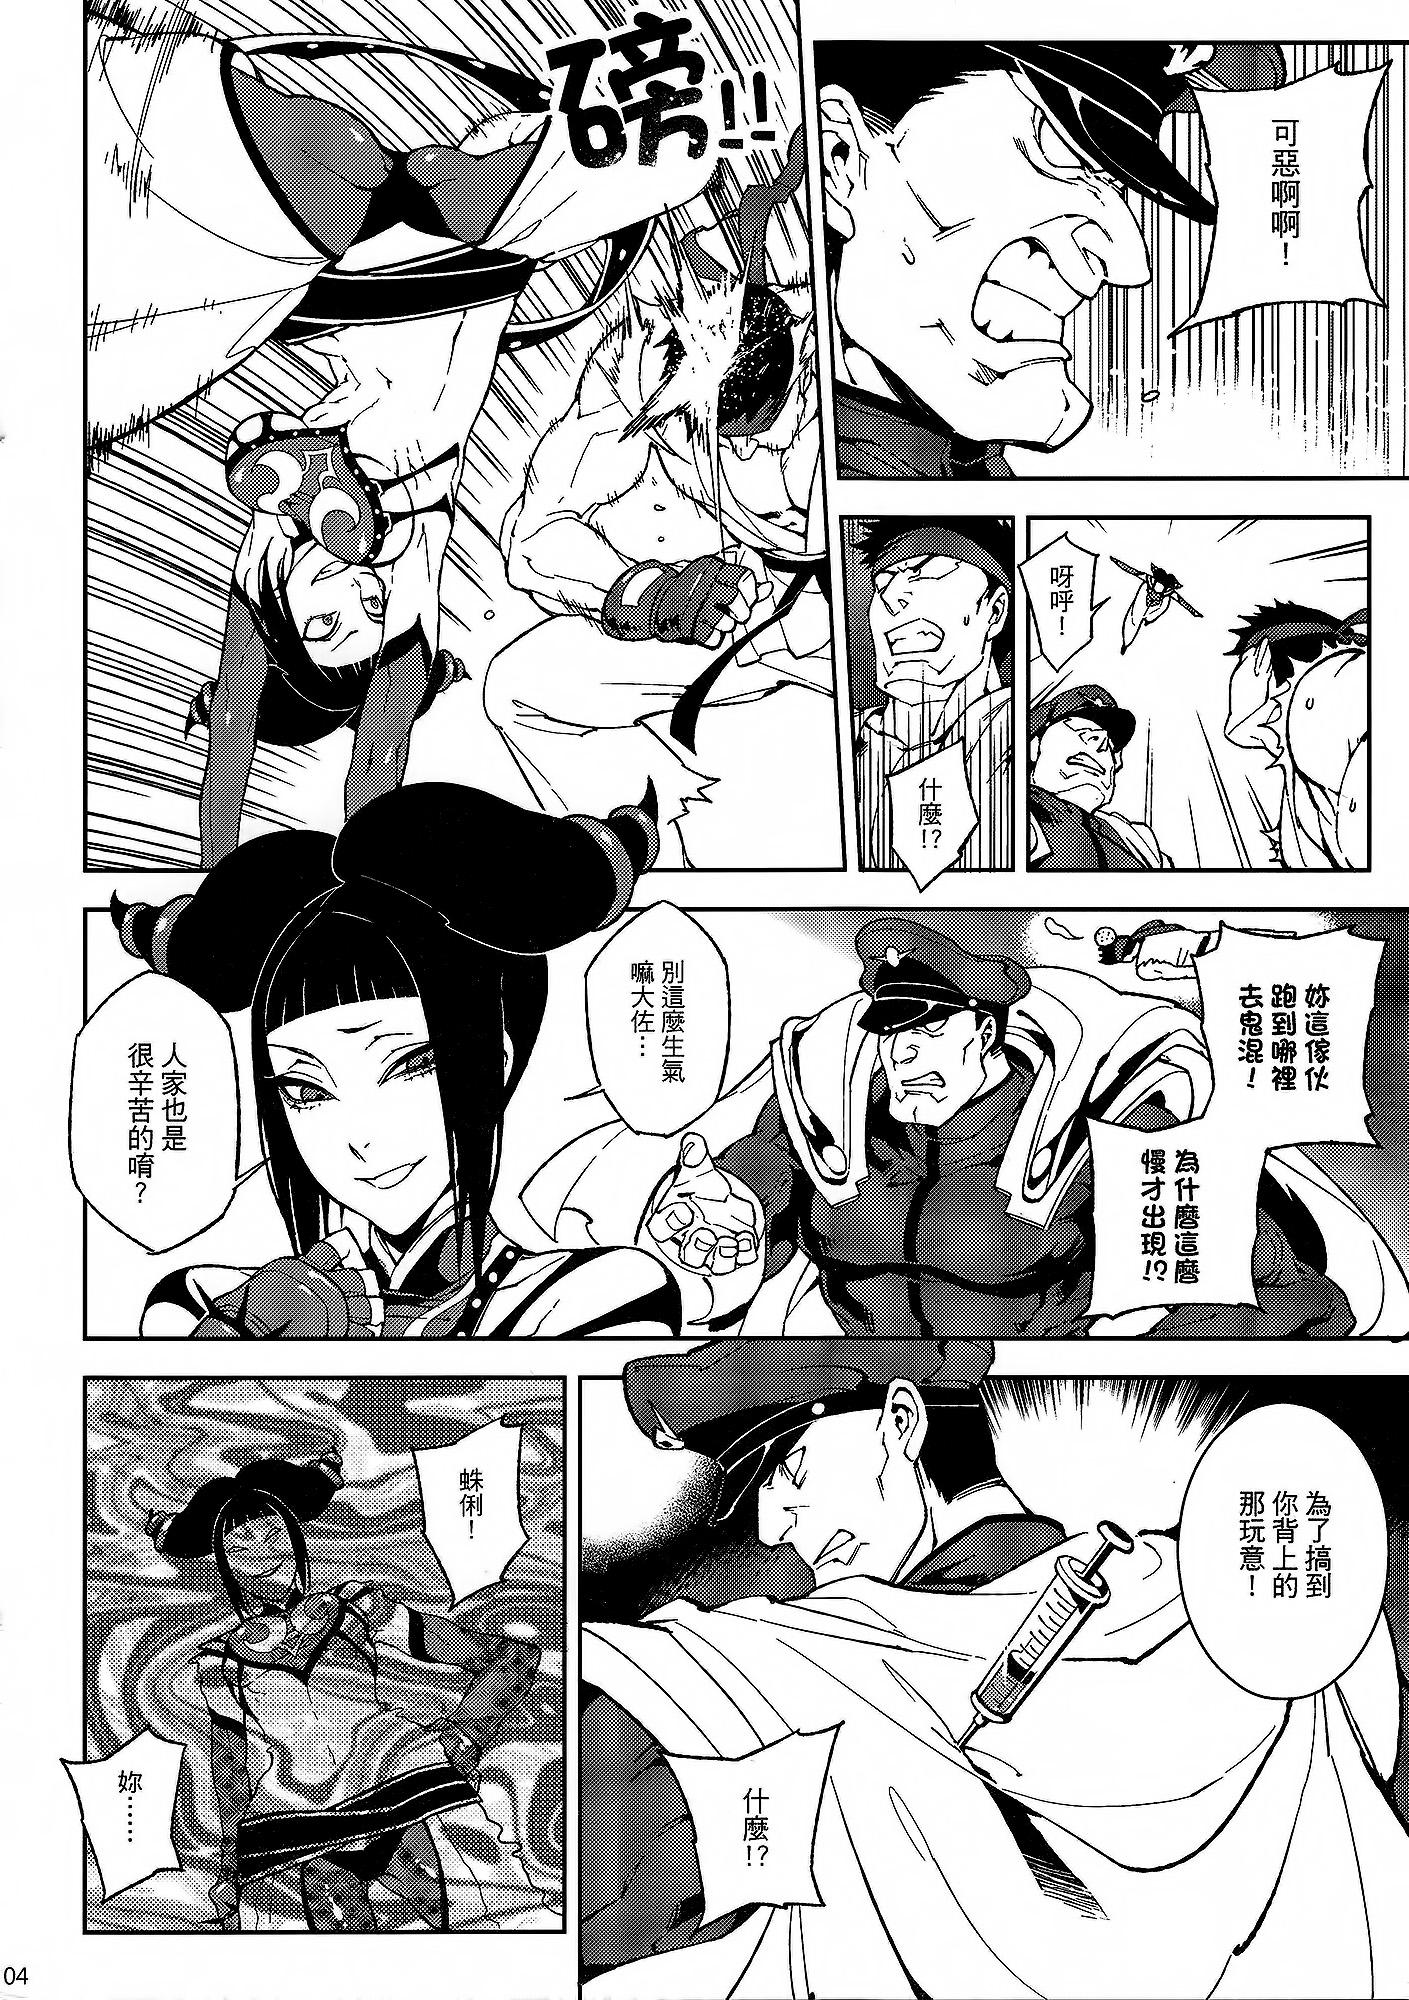 Sexy Girl Sex Lose Control - Street fighter Bed - Page 5